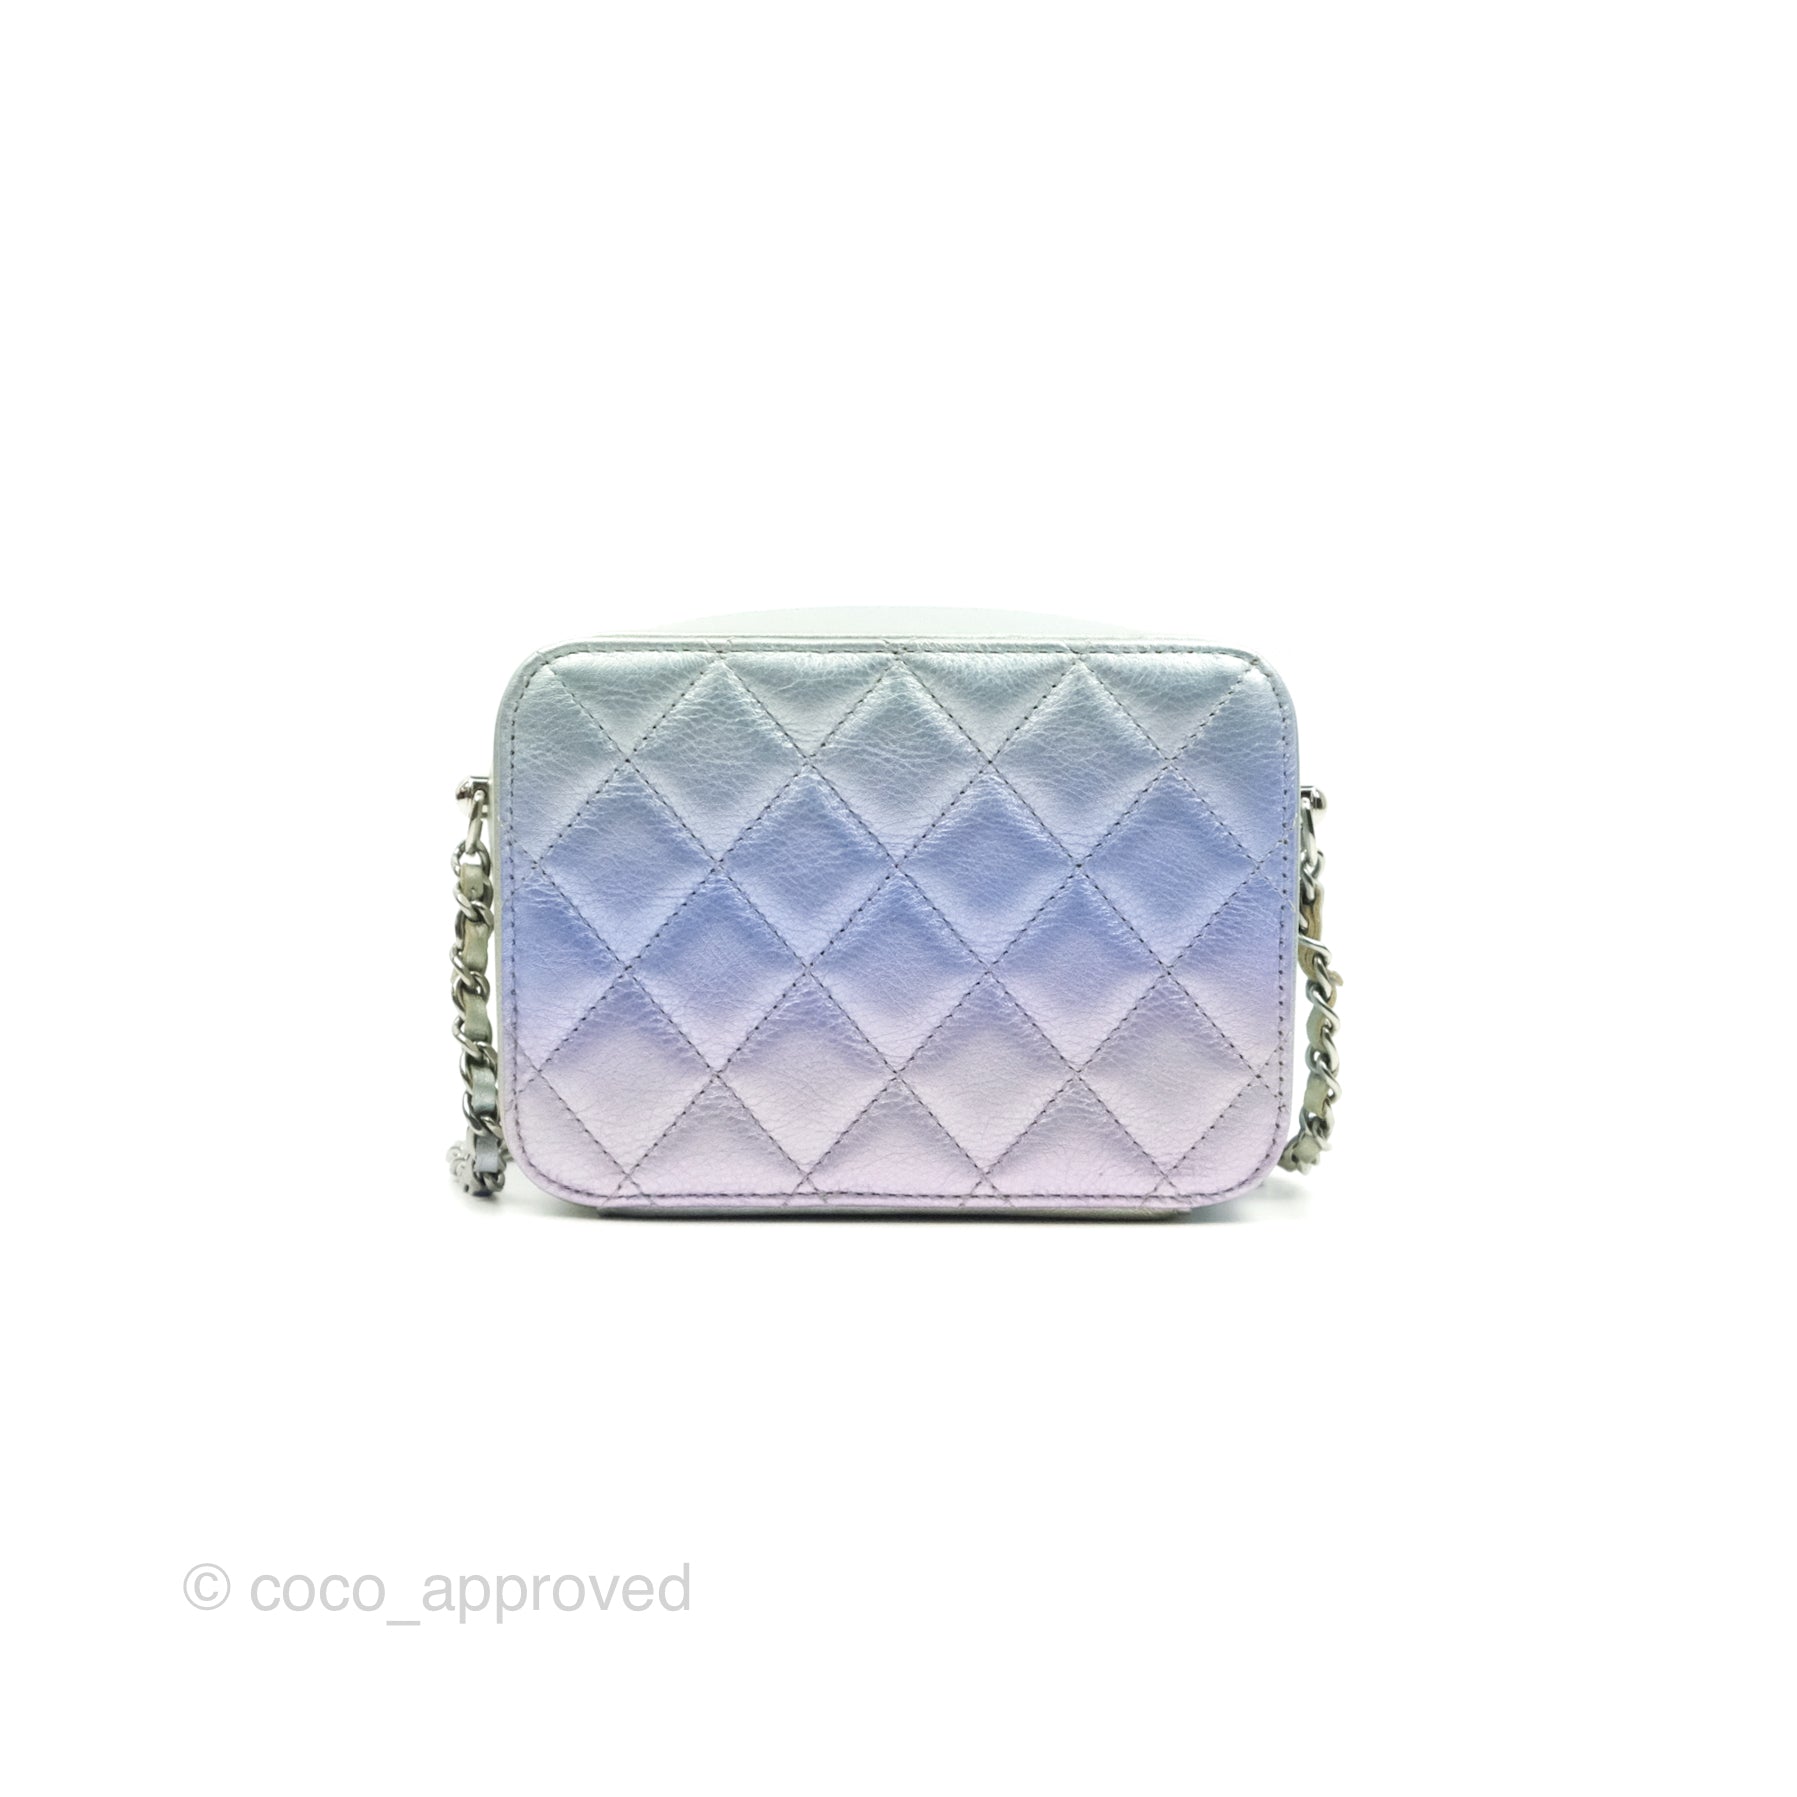 Chanel Gradient Metallic Calfskin Quilted Camera Bag Silver